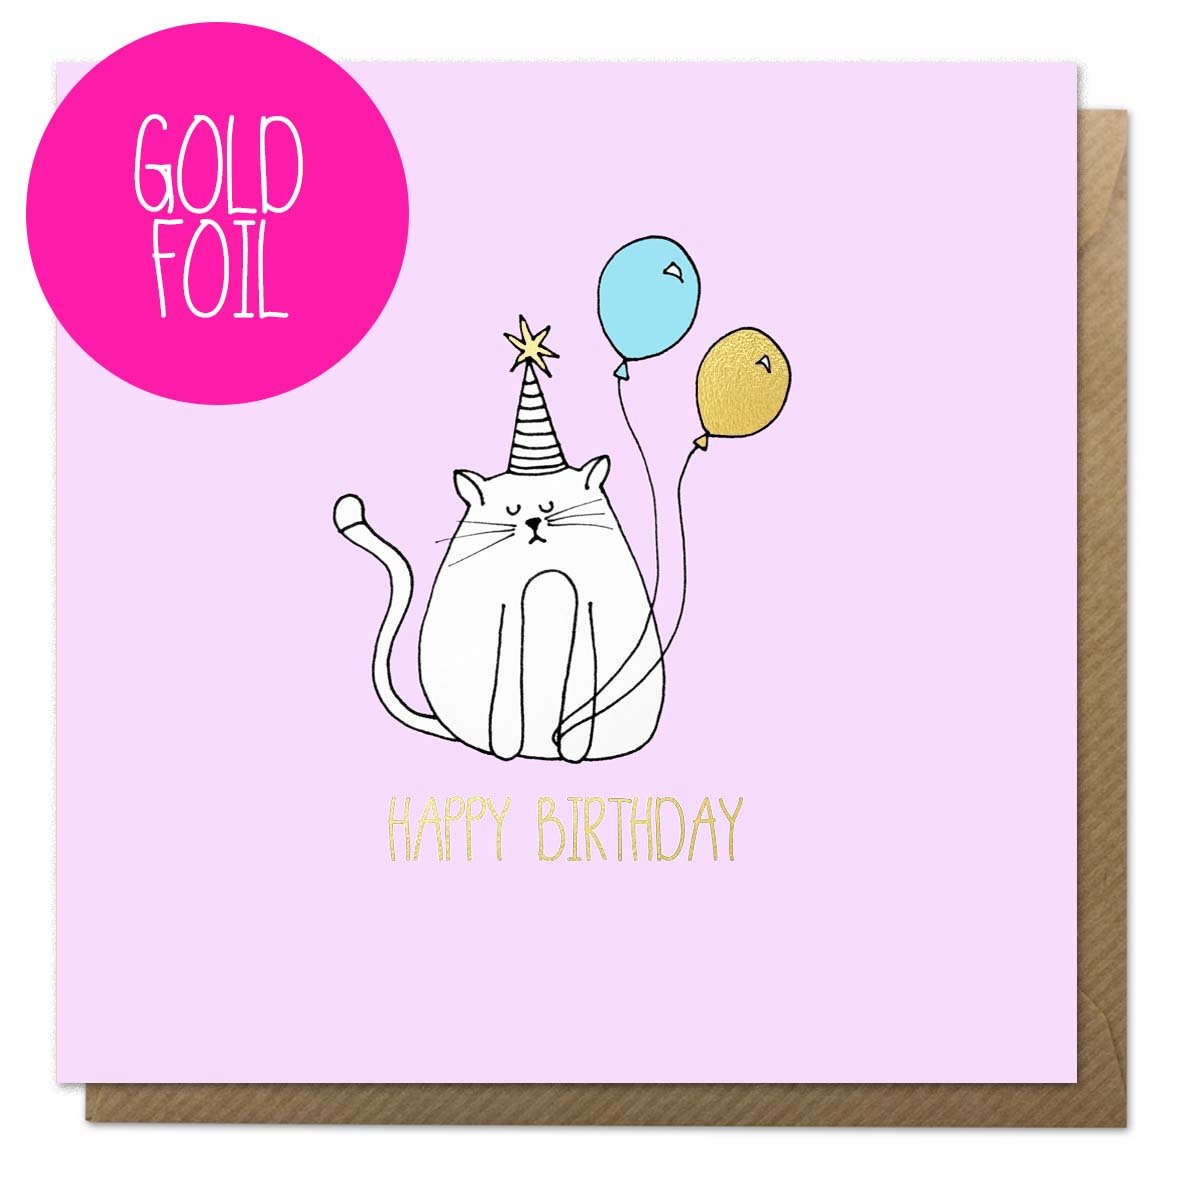 Birthday card with a cat, balloon and gold foil